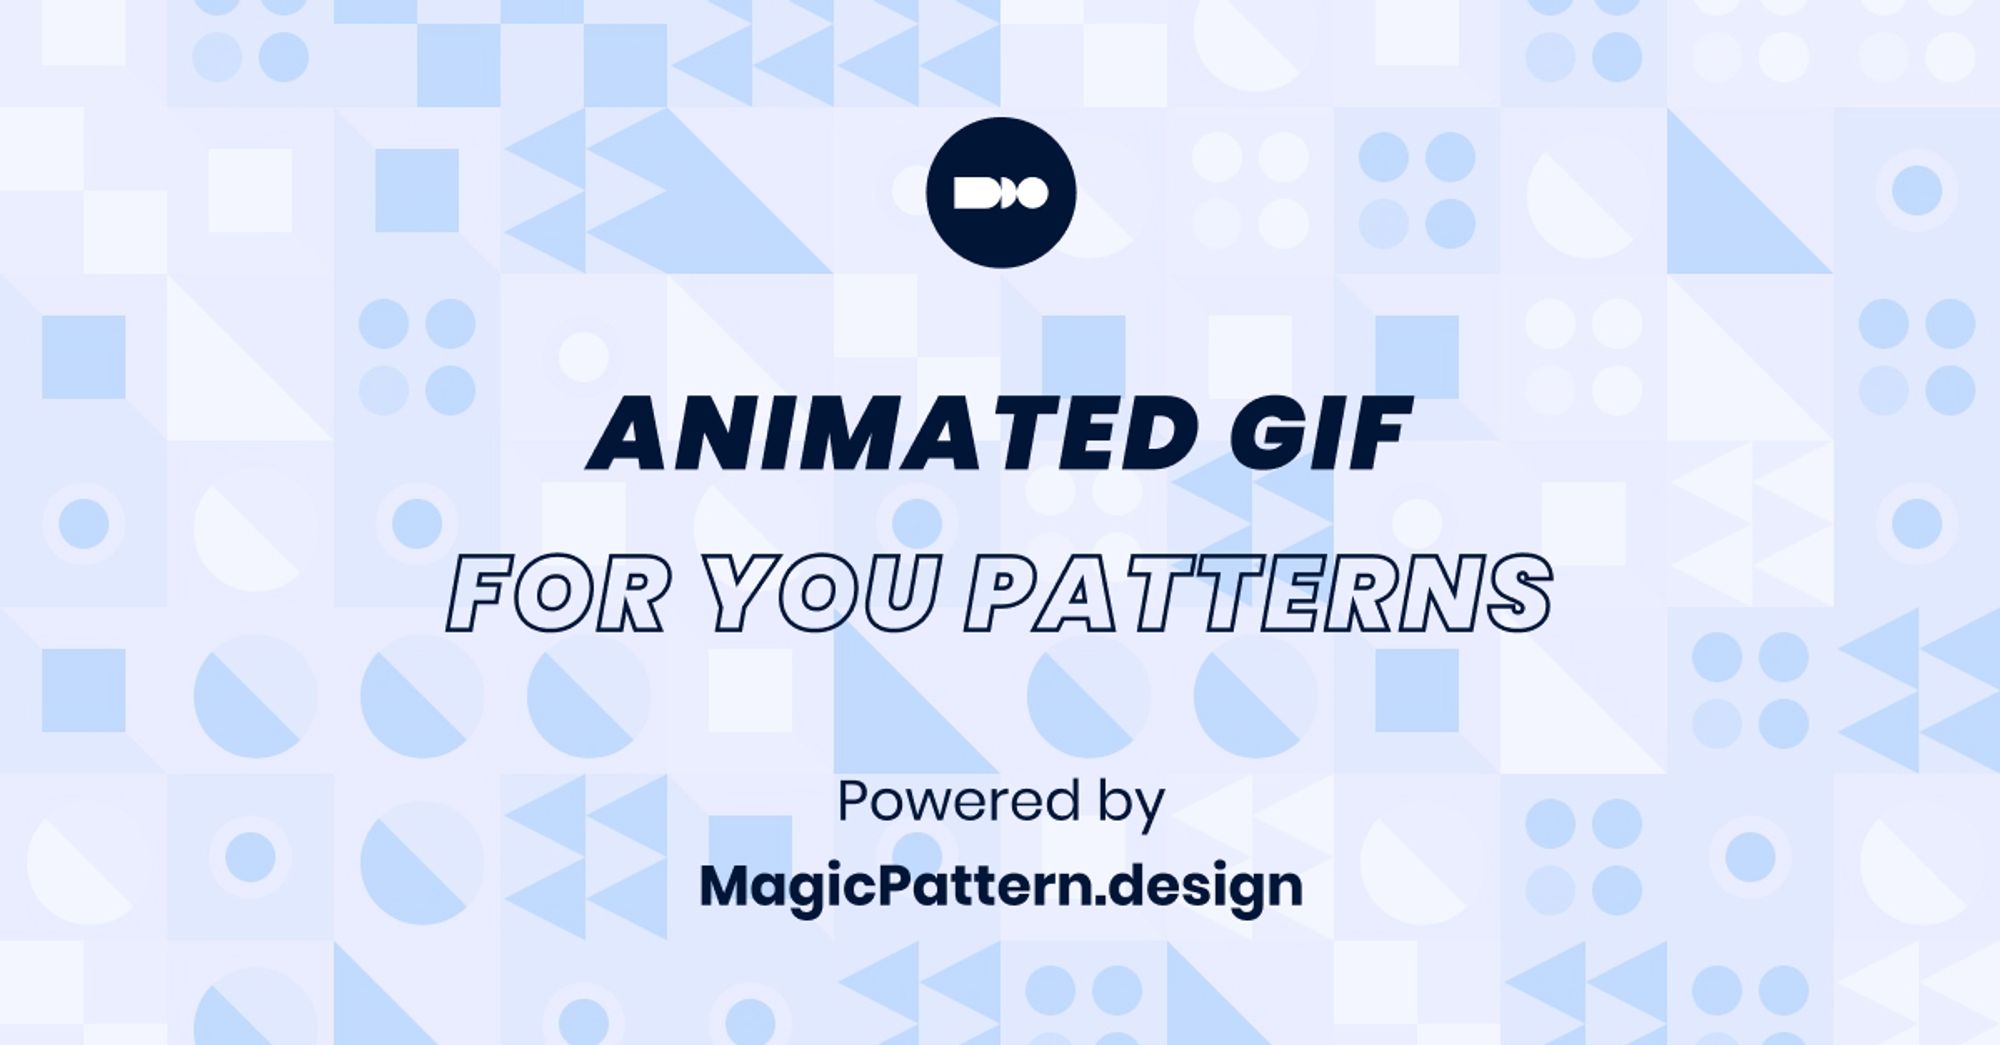 Animated GIF patterns for social media posts